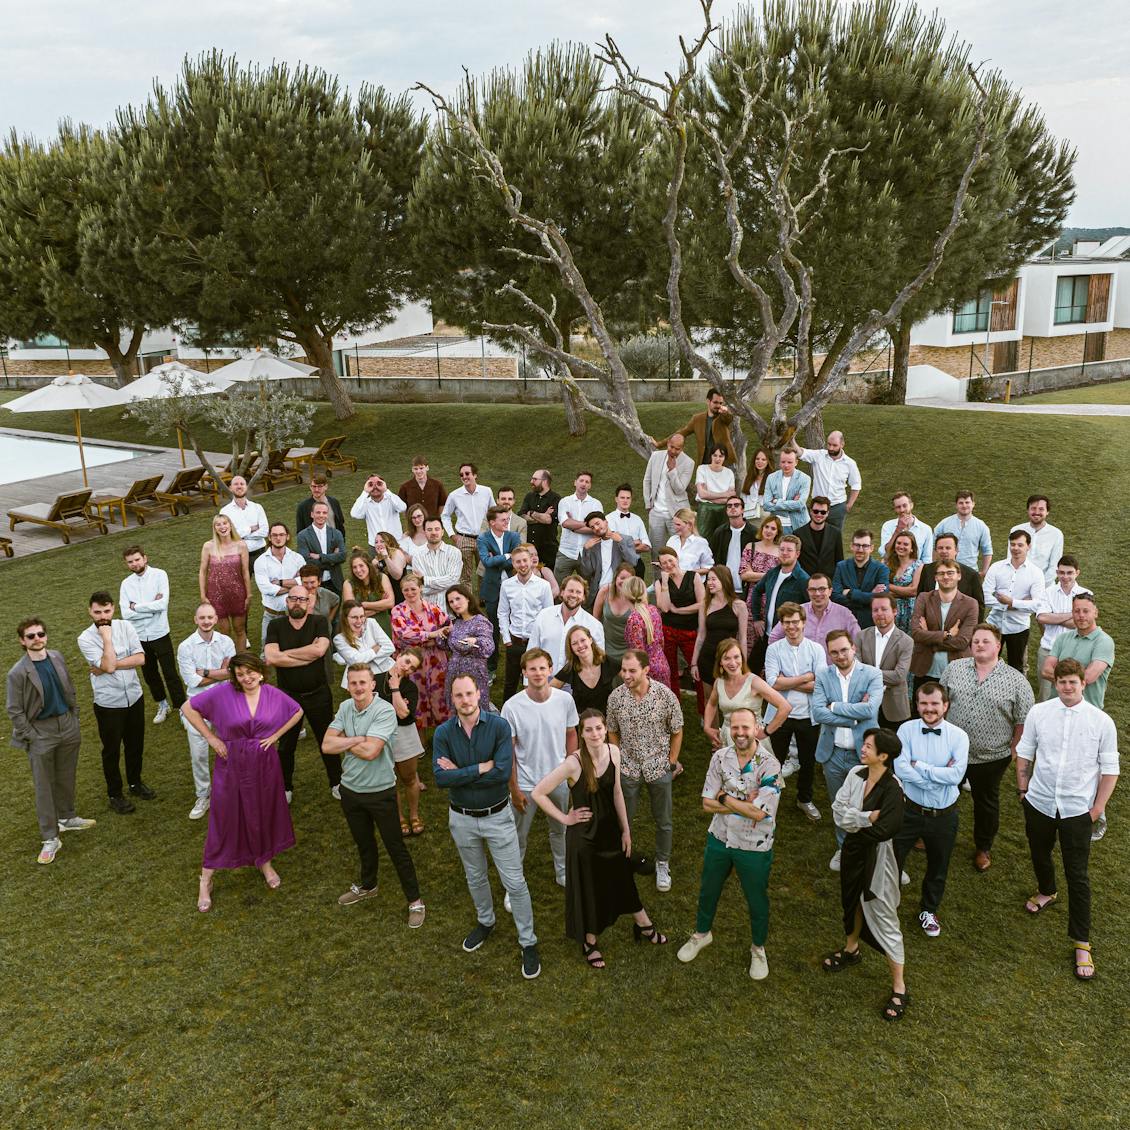 The entire Craftzing team standing side by side in the garden of a Portuguese resort where the Craftzing Unplug took place. In the background trees, a swimming pool and holiday homes.